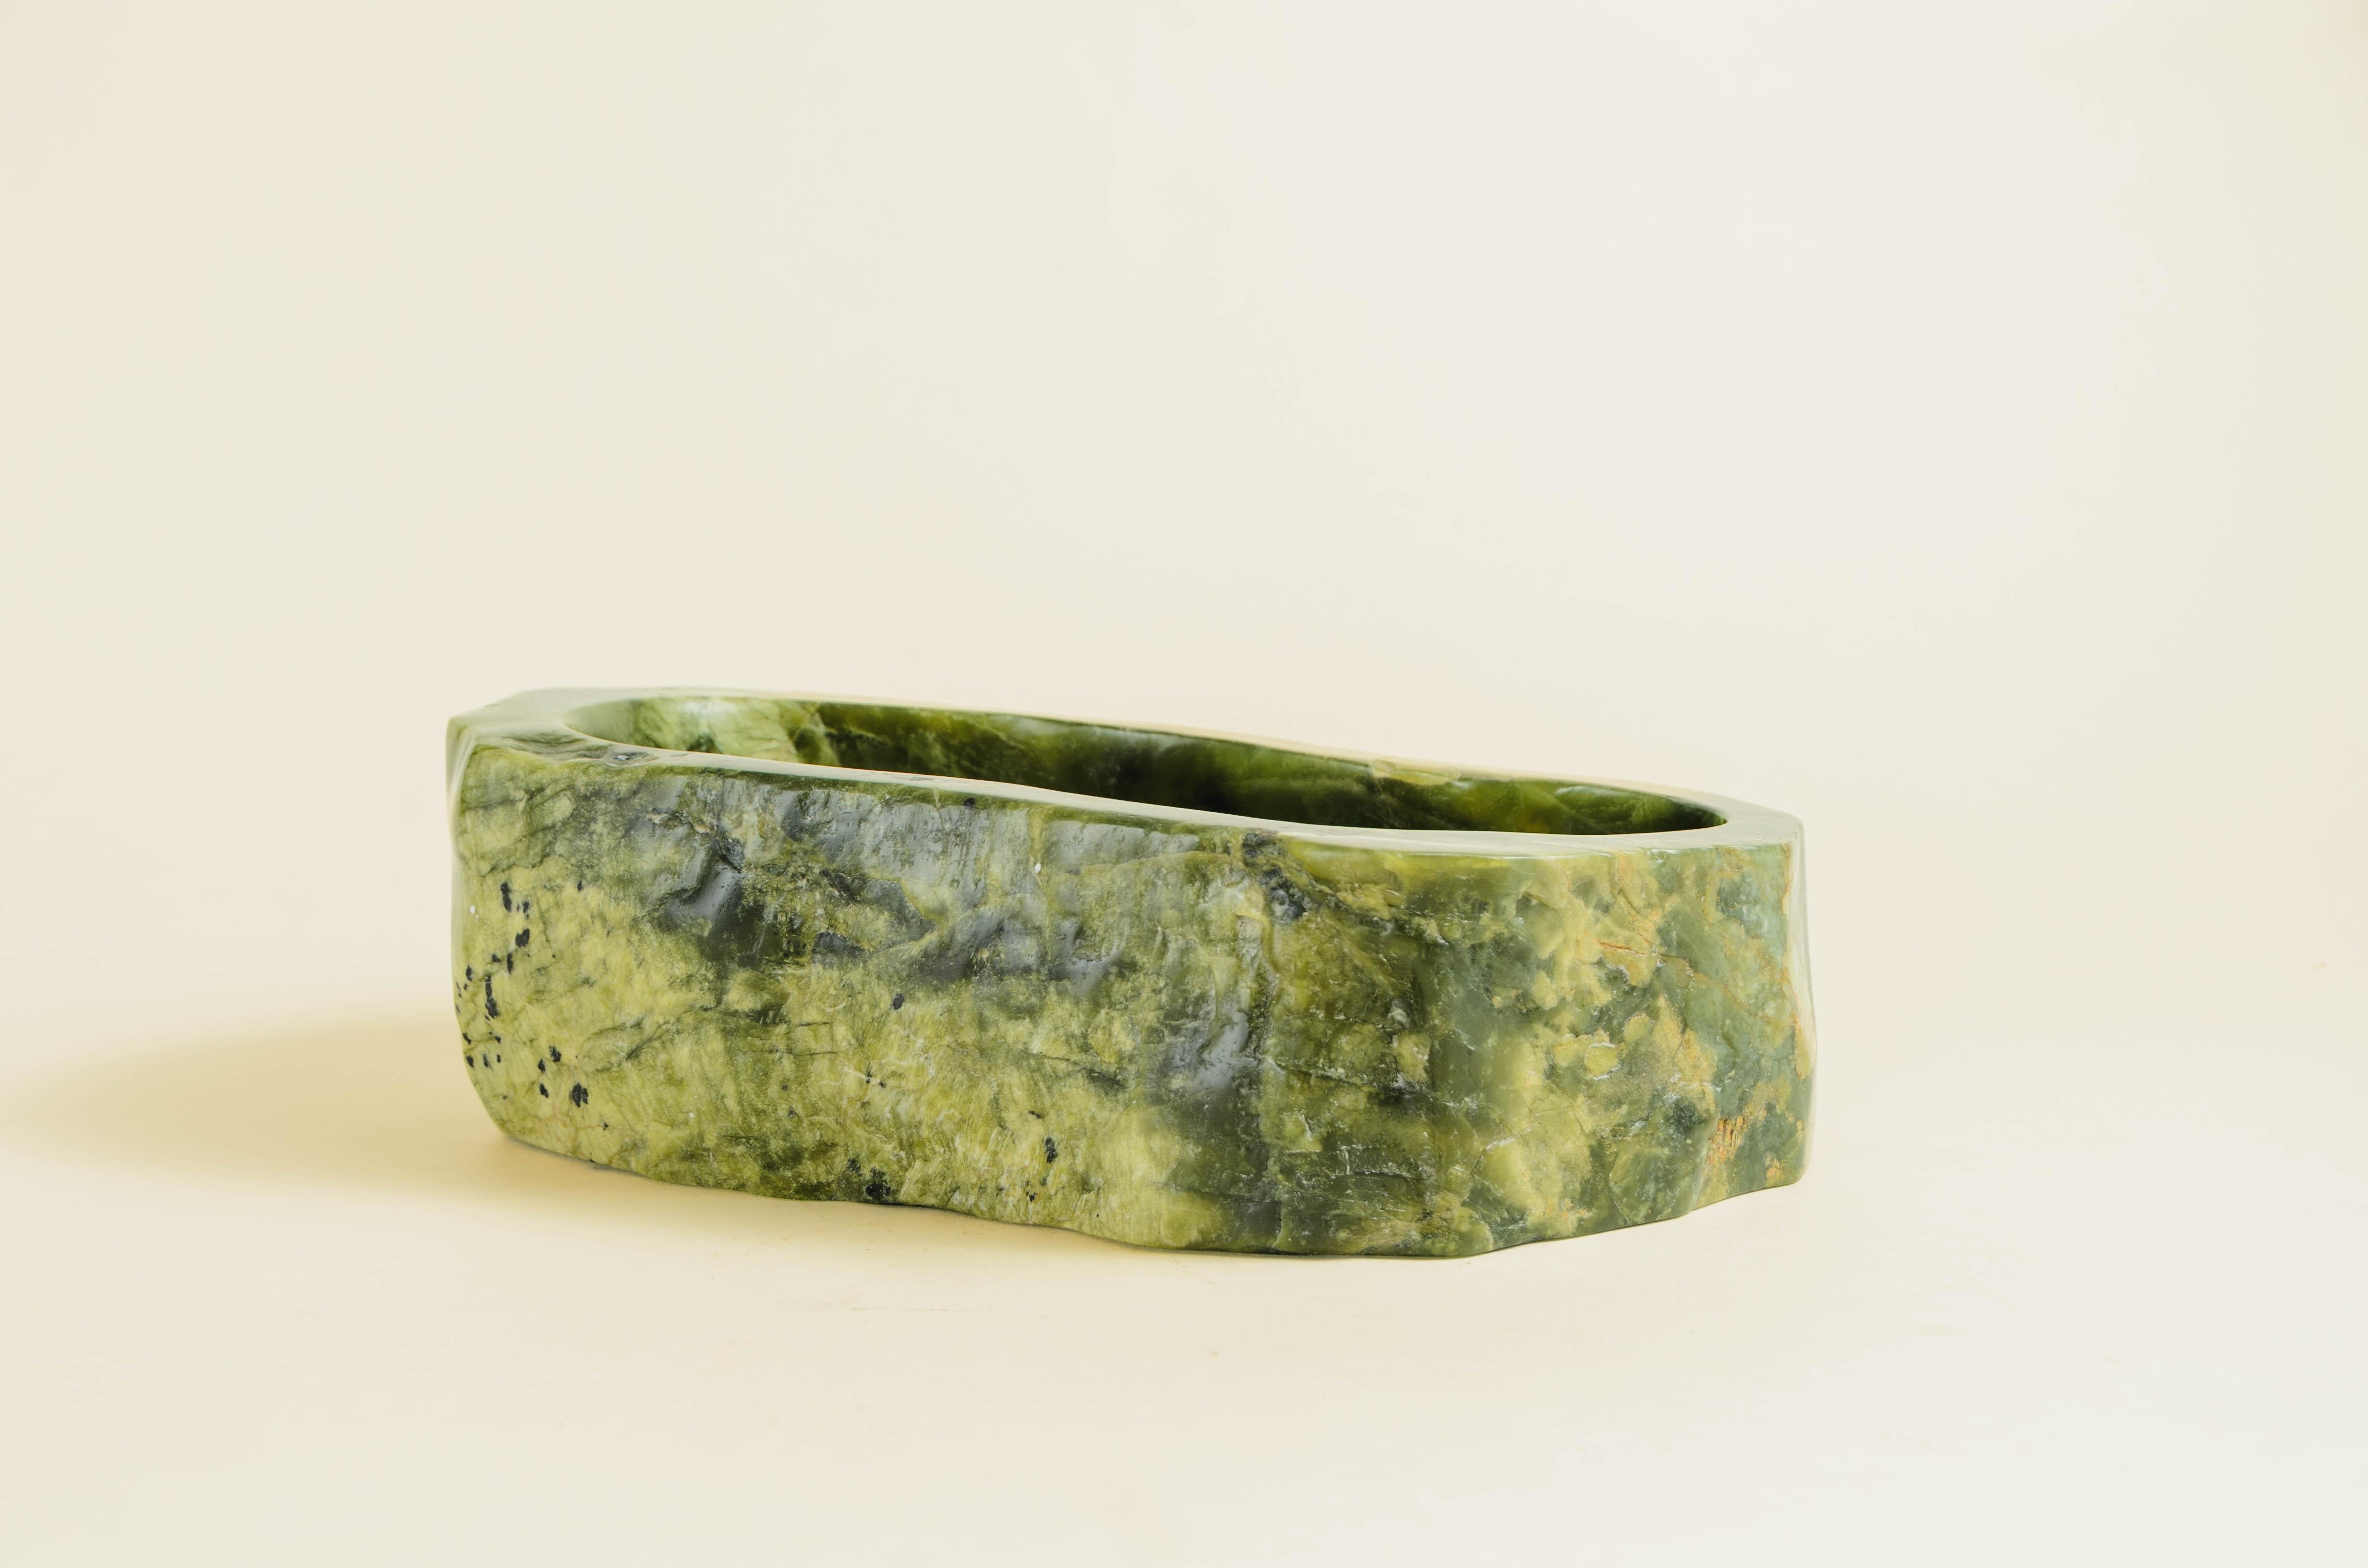 Minimalist Contemporary Nephrite Jade Oblong Cachepot by Robert Kuo, Limited Edition For Sale